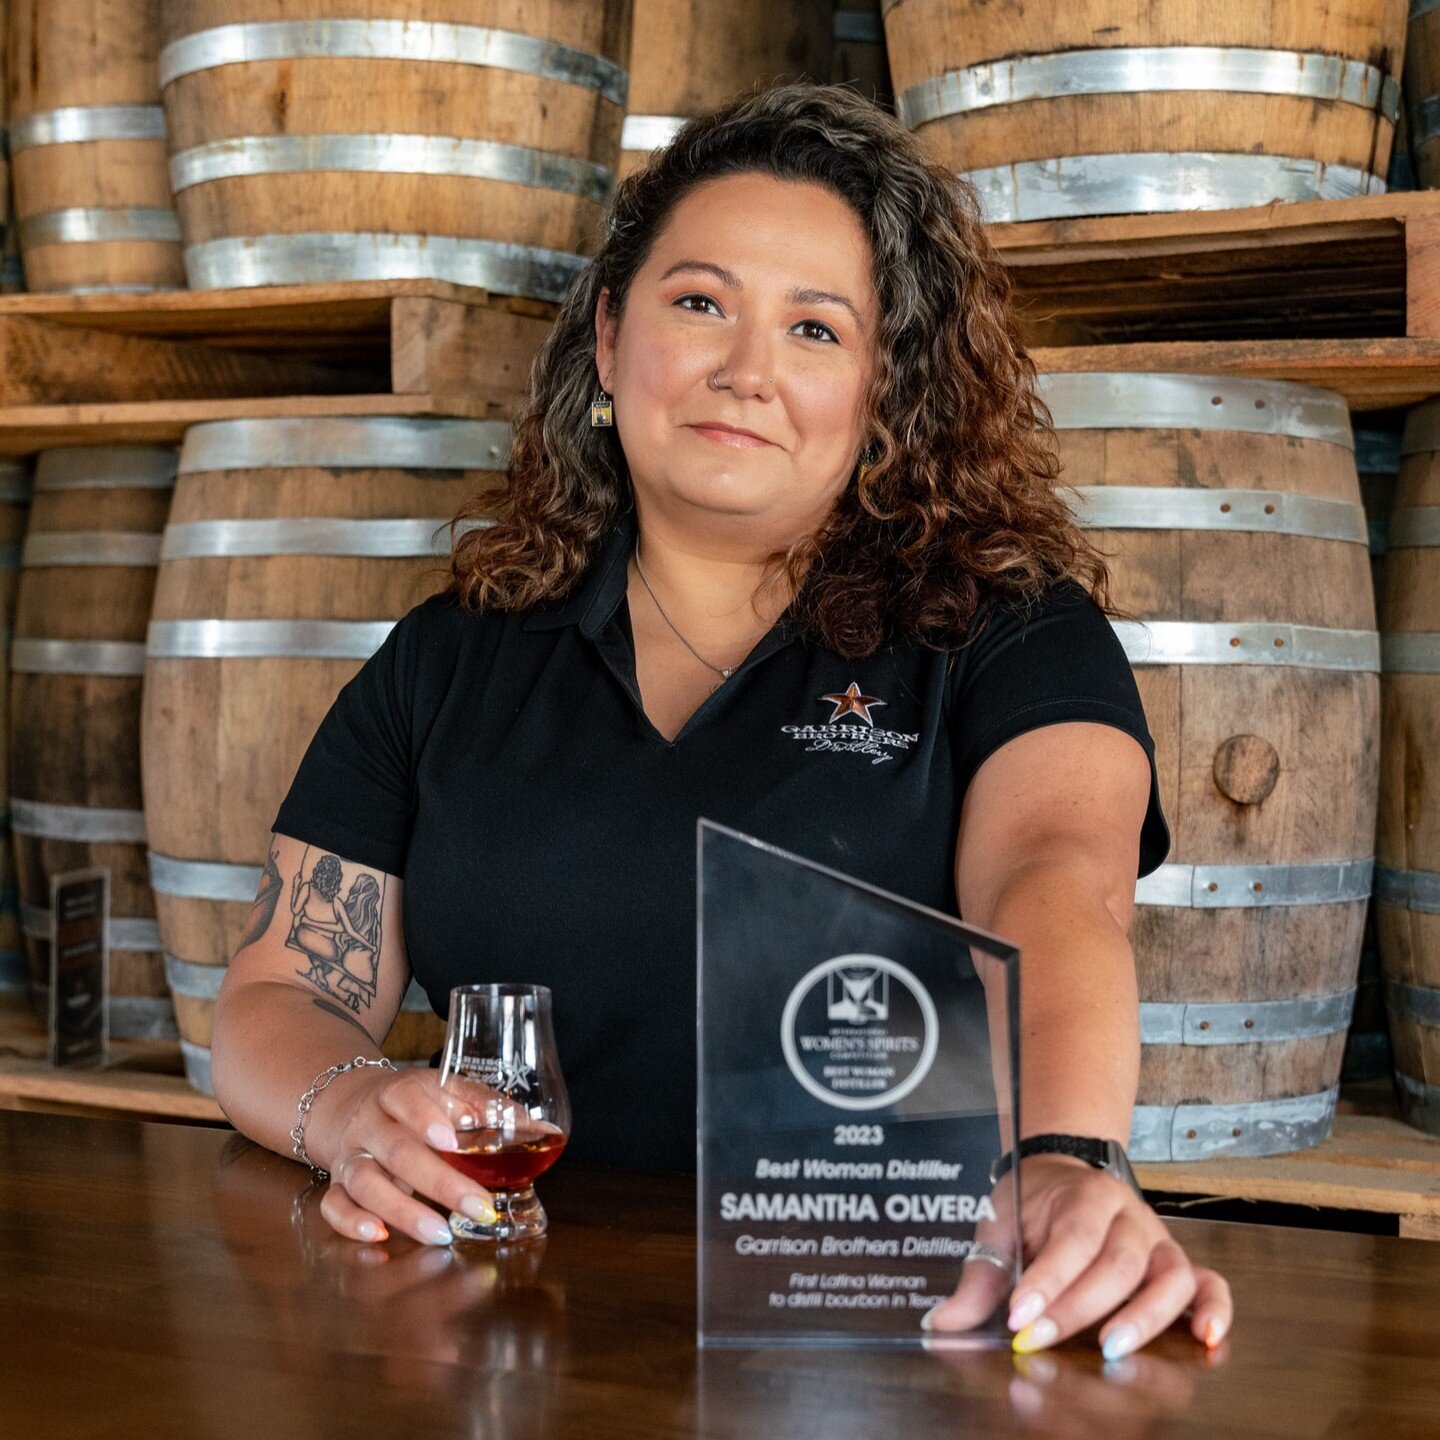 Samantha Olvera, Distiller at Garrison Brothers, made history as the first female bourbon distiller in Texas.

She was trained under @garrisonbros Master Distiller Donnis Todd and has spent almost 10 years on the team.

In 2023, Sam Olvera was recogn